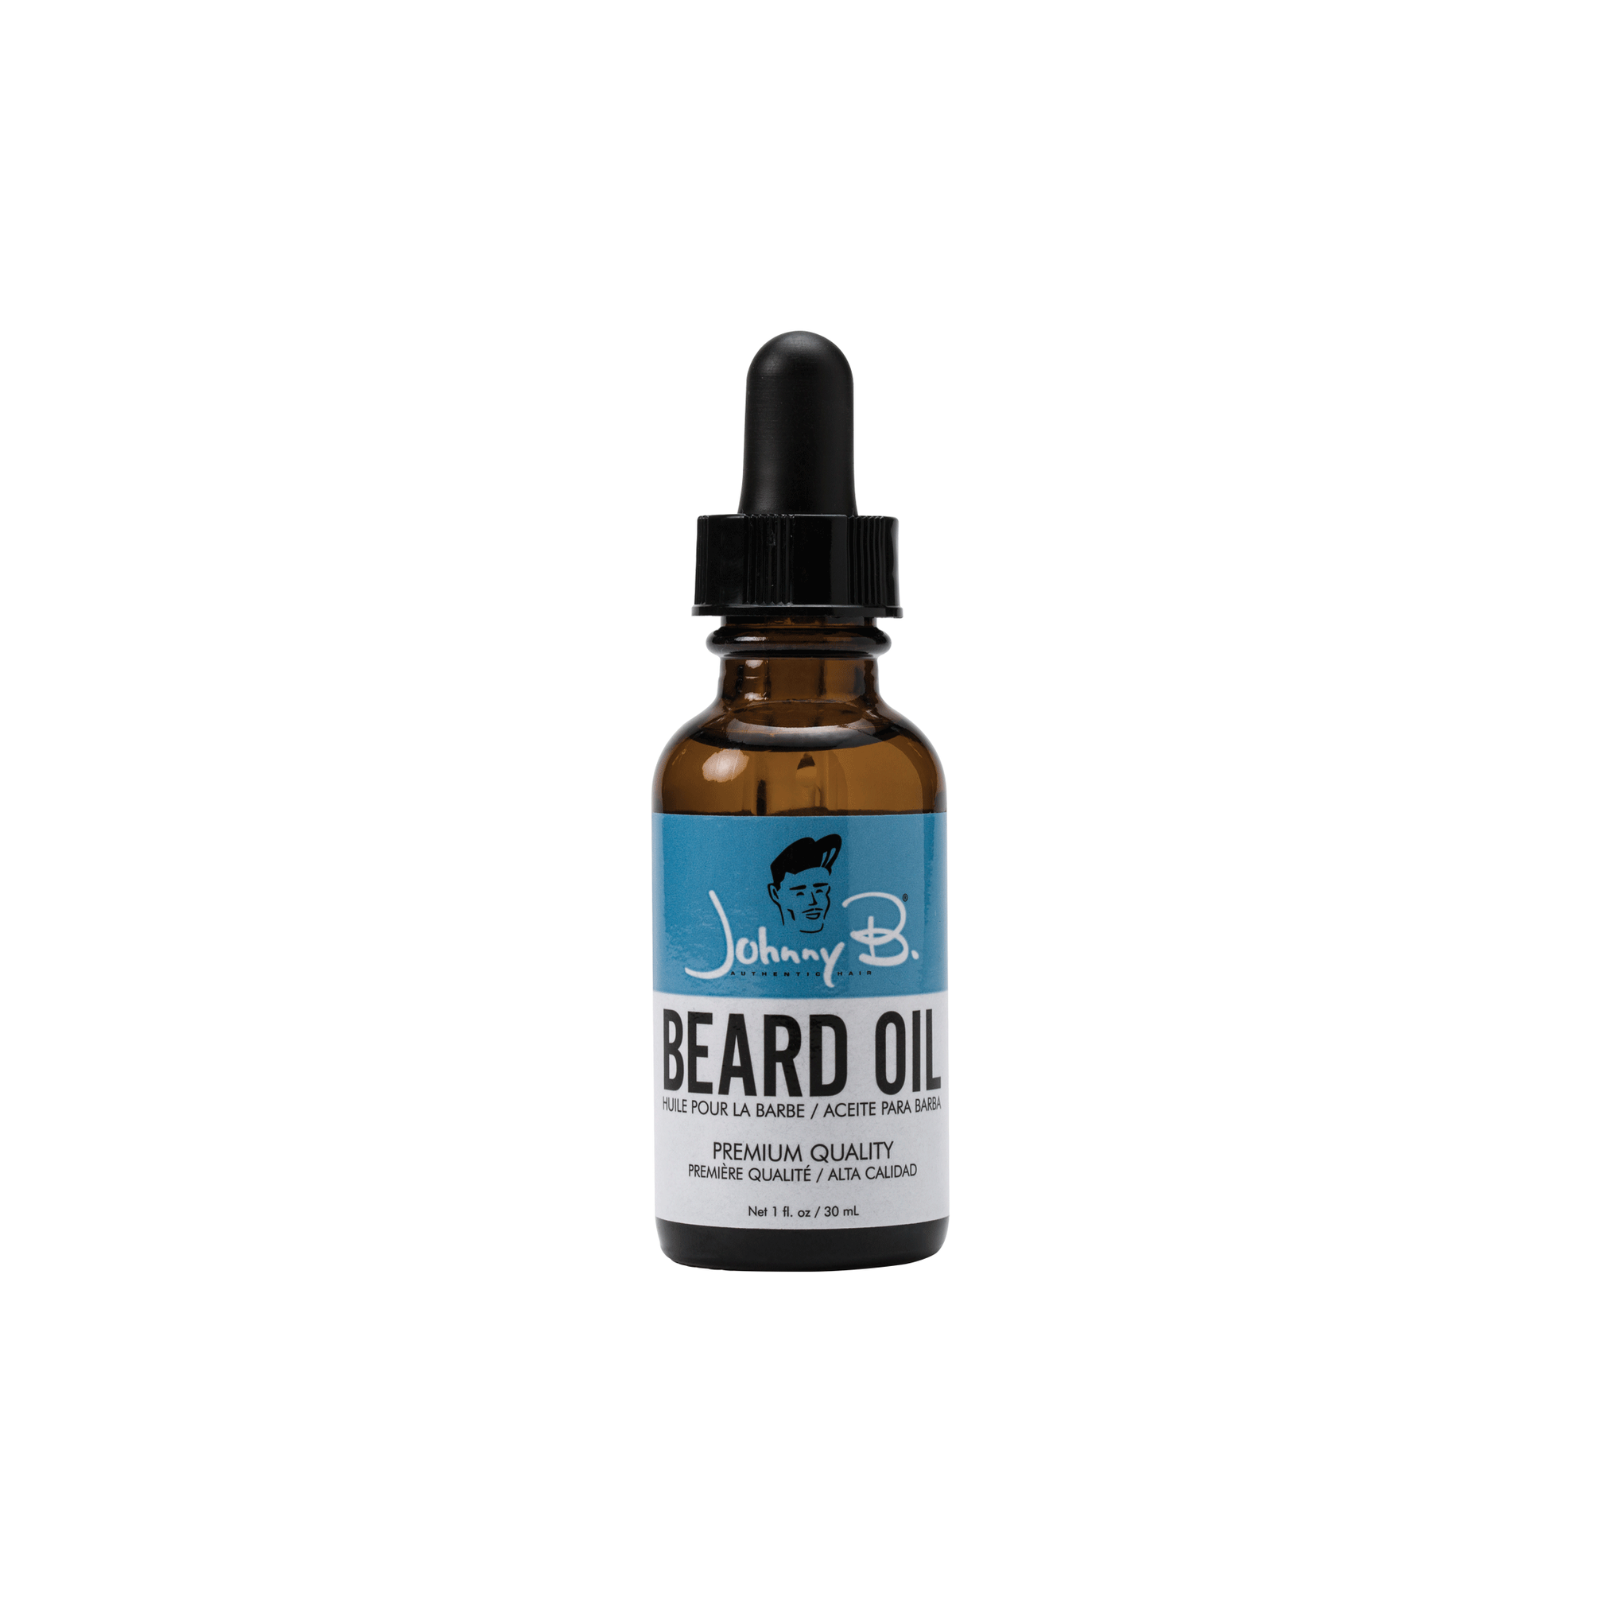 Johnny B BEARD OIL helps moisturize your facial hair and nourish the skin beneath. The premium quality blend of natural ingredients will condition, hydrate and shape your unruly beard while promoting growth and softness.